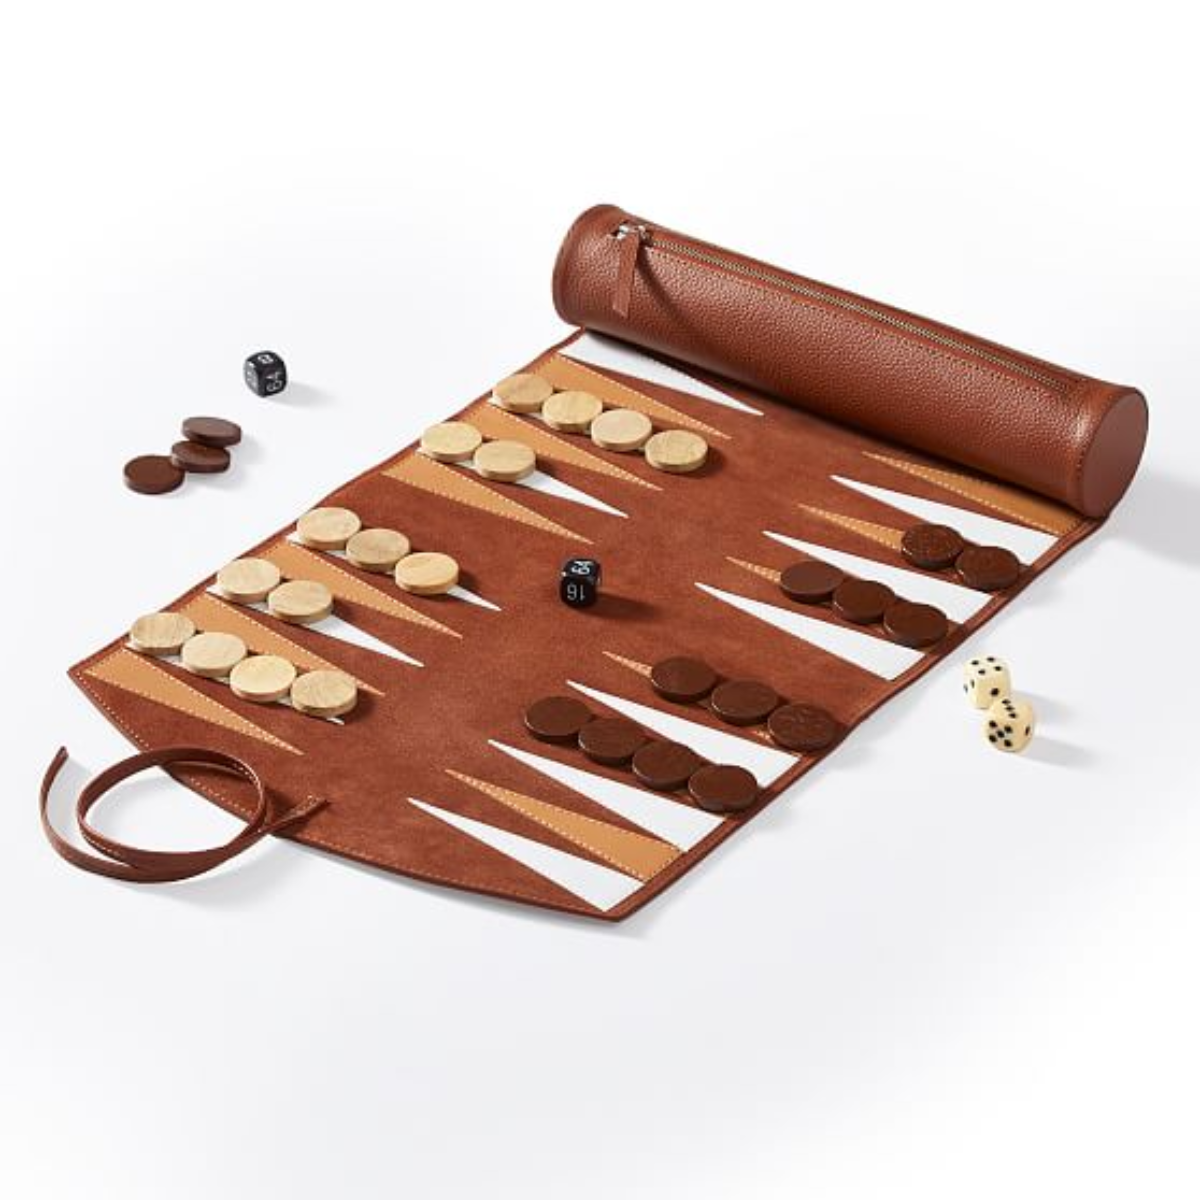 37. Timeless Elegance: Leather Backgammon Set, the Perfect 3rd Anniversary Gift for Him